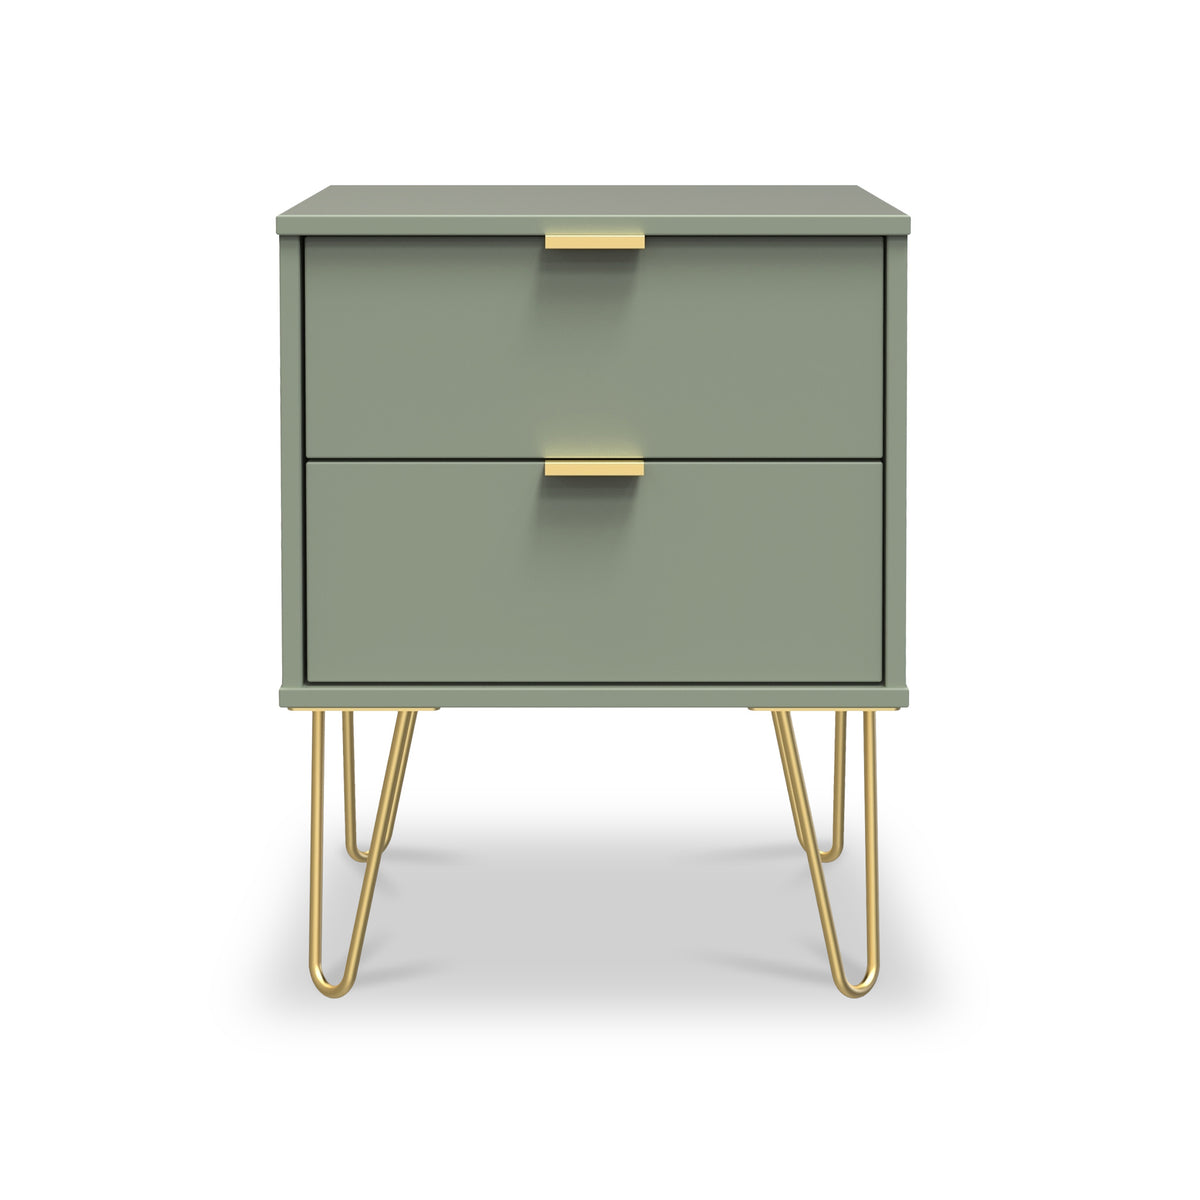 Moreno Olive with Gold Hairpin Legs Wireless Charging 2 Drawer Bedside Table by Roseland Furniture